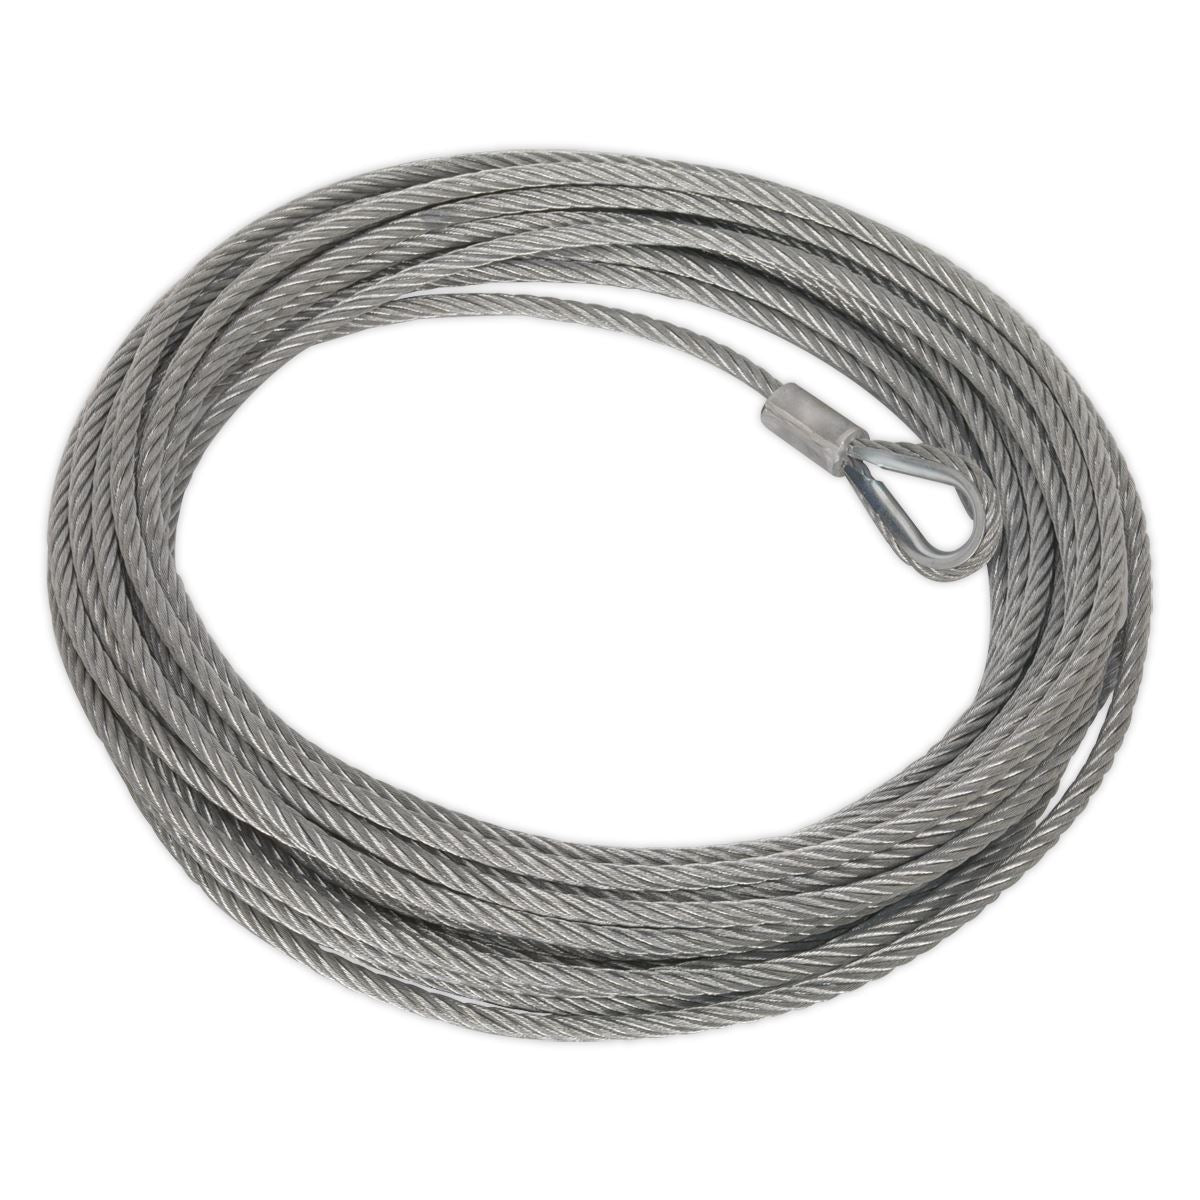 Sealey Wire Rope (Ø13mm x 25m) for RW8180